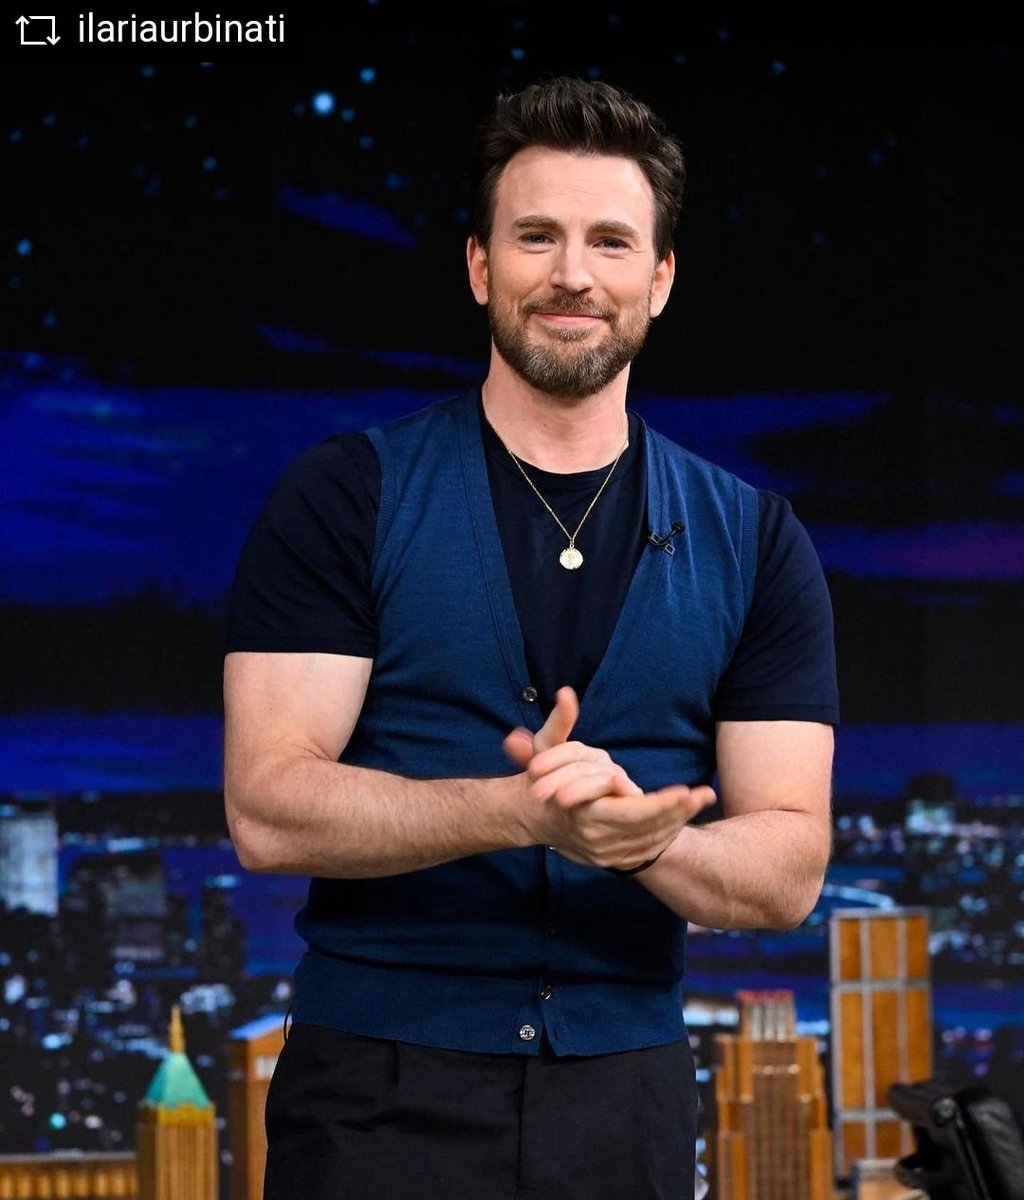 @chrisevans styled by the one and only @ilariaurbinati for @fallontonight 
He was wearing
@CottonCitizen 
@JohnSmedley
@LondonSockCo 

#REPOST @ilariaurbinati 
@chrisevans on @FallonTonight for #Ghosted - styled by yours truly 

#ChrisEvans #ilariaurbinati